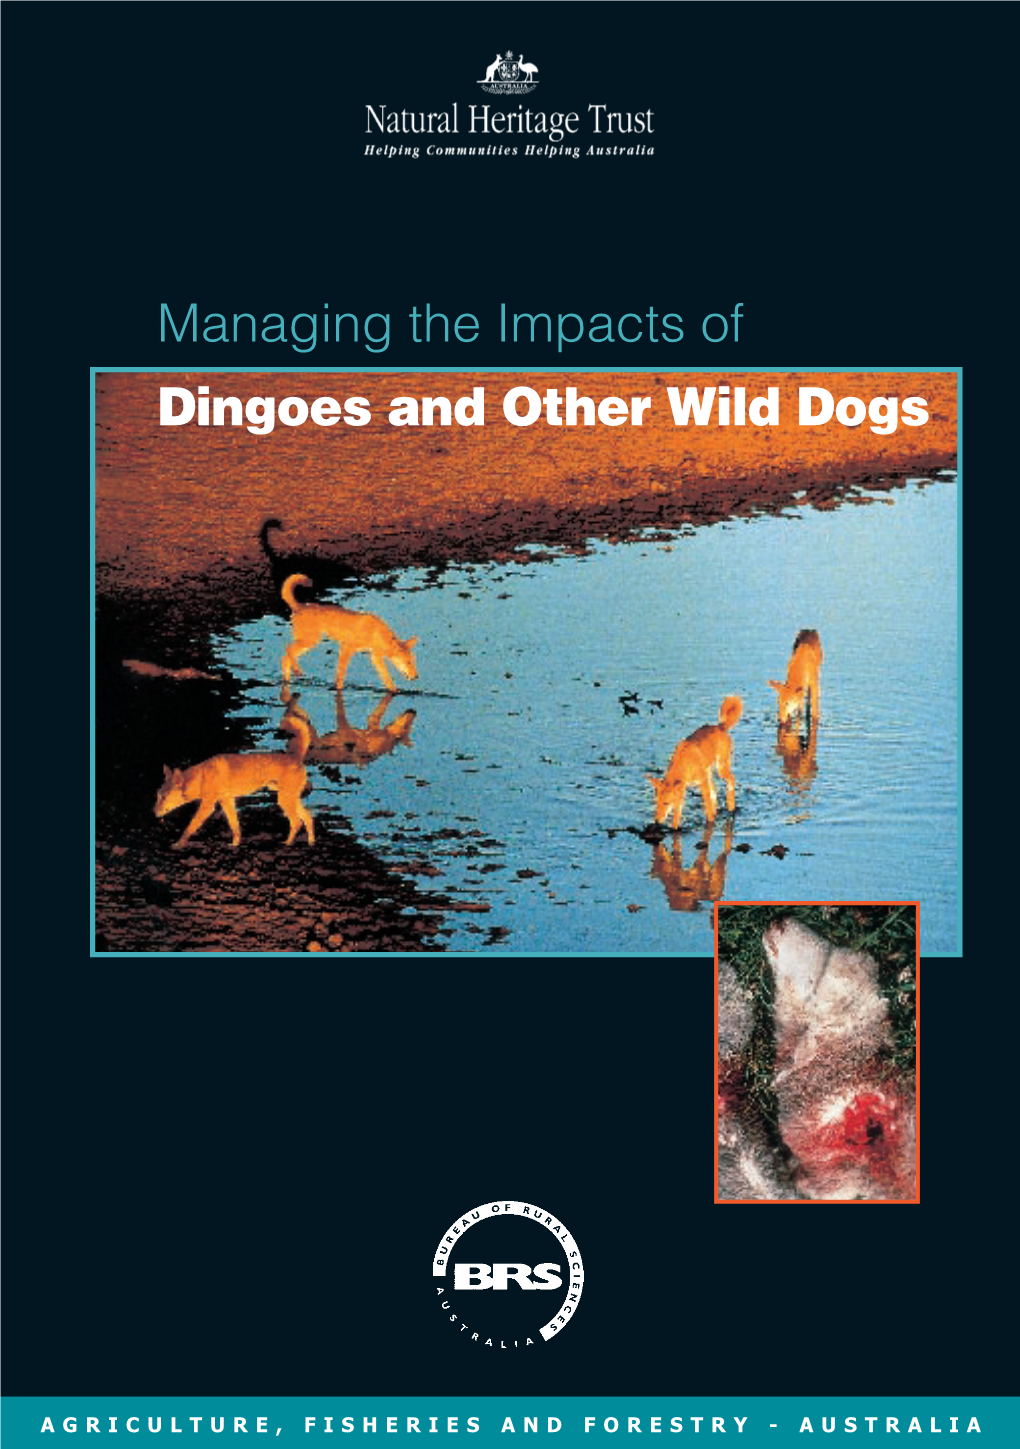 Managing the Impacts of Dingoes and Other Wild Dogs